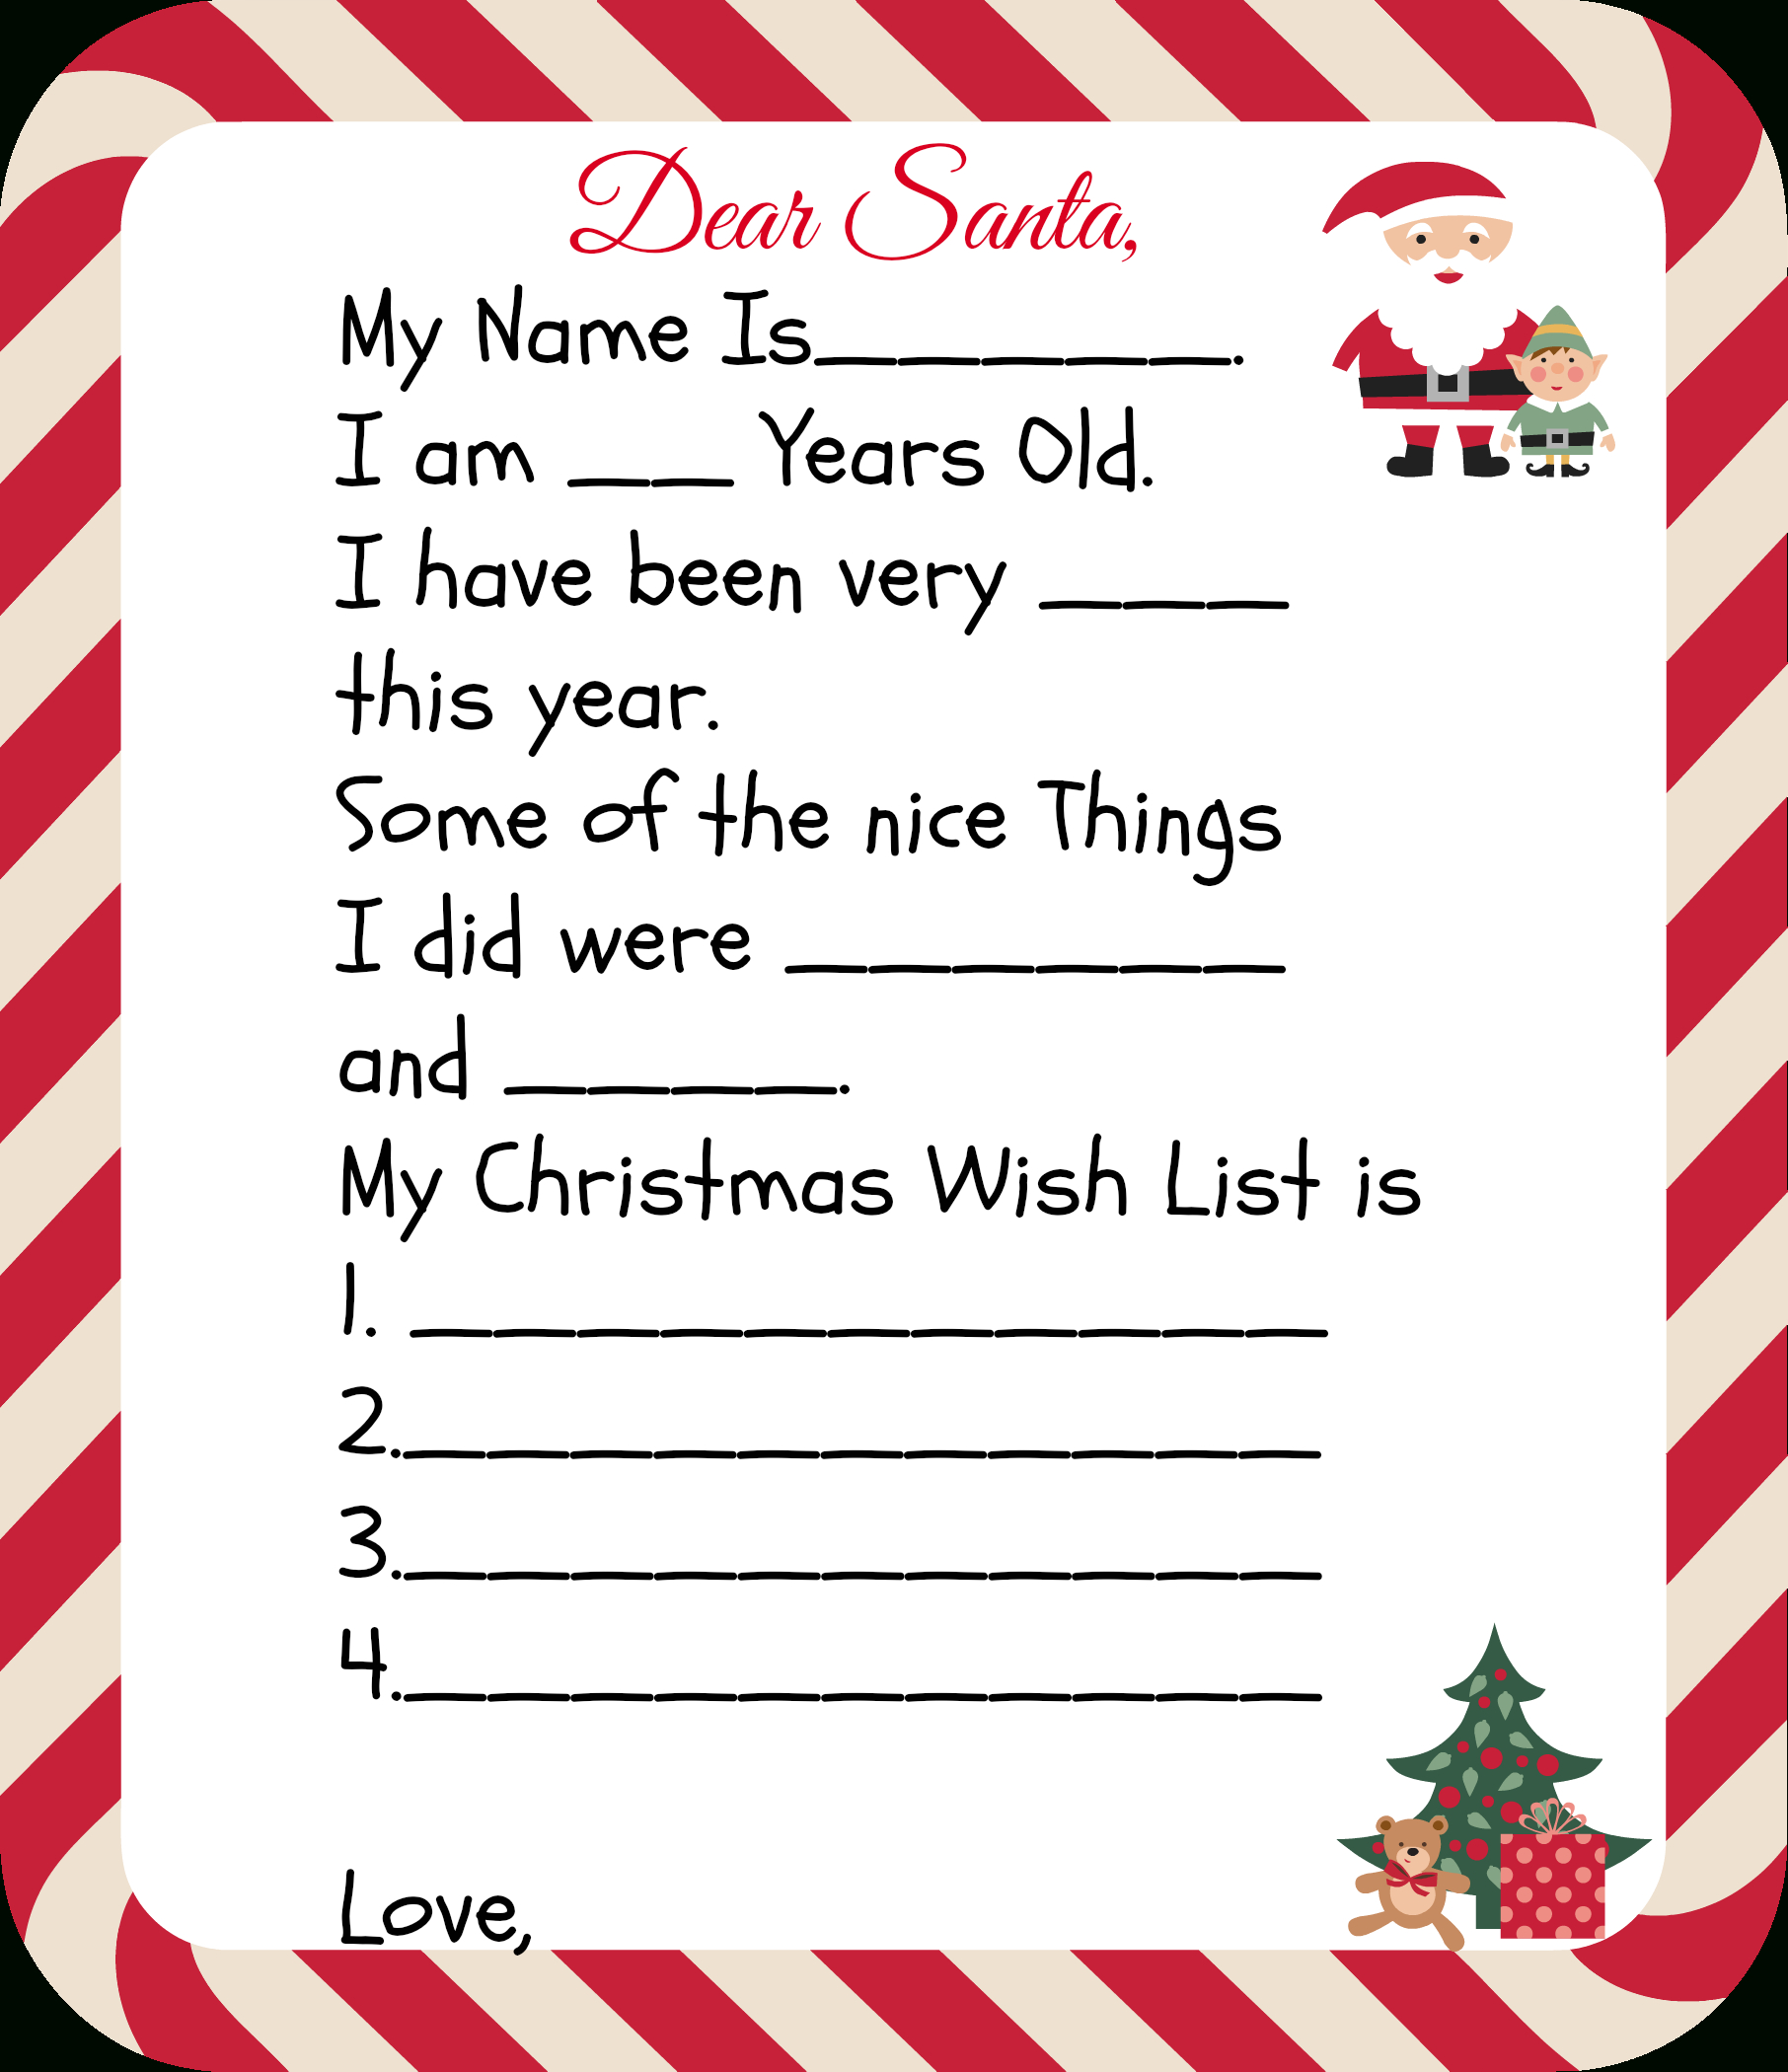 Free Printable Santa Letters For Kids - Free Printable Christmas Letters From Santa